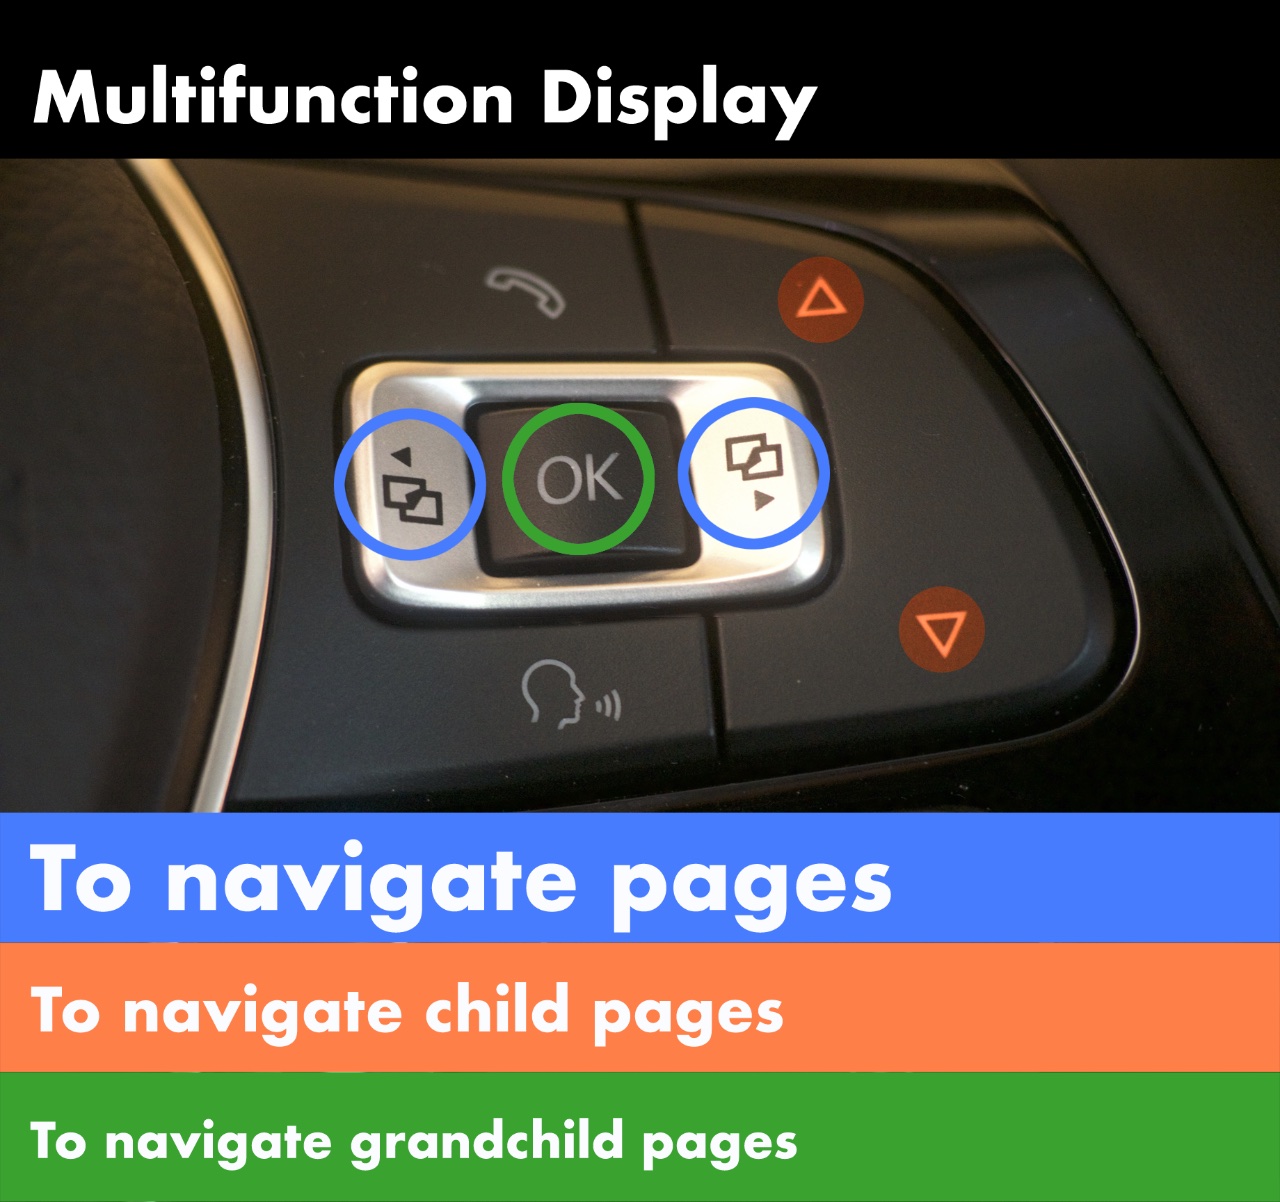 Multifunction Display - how to use the steering wheel buttons to get to the page you want